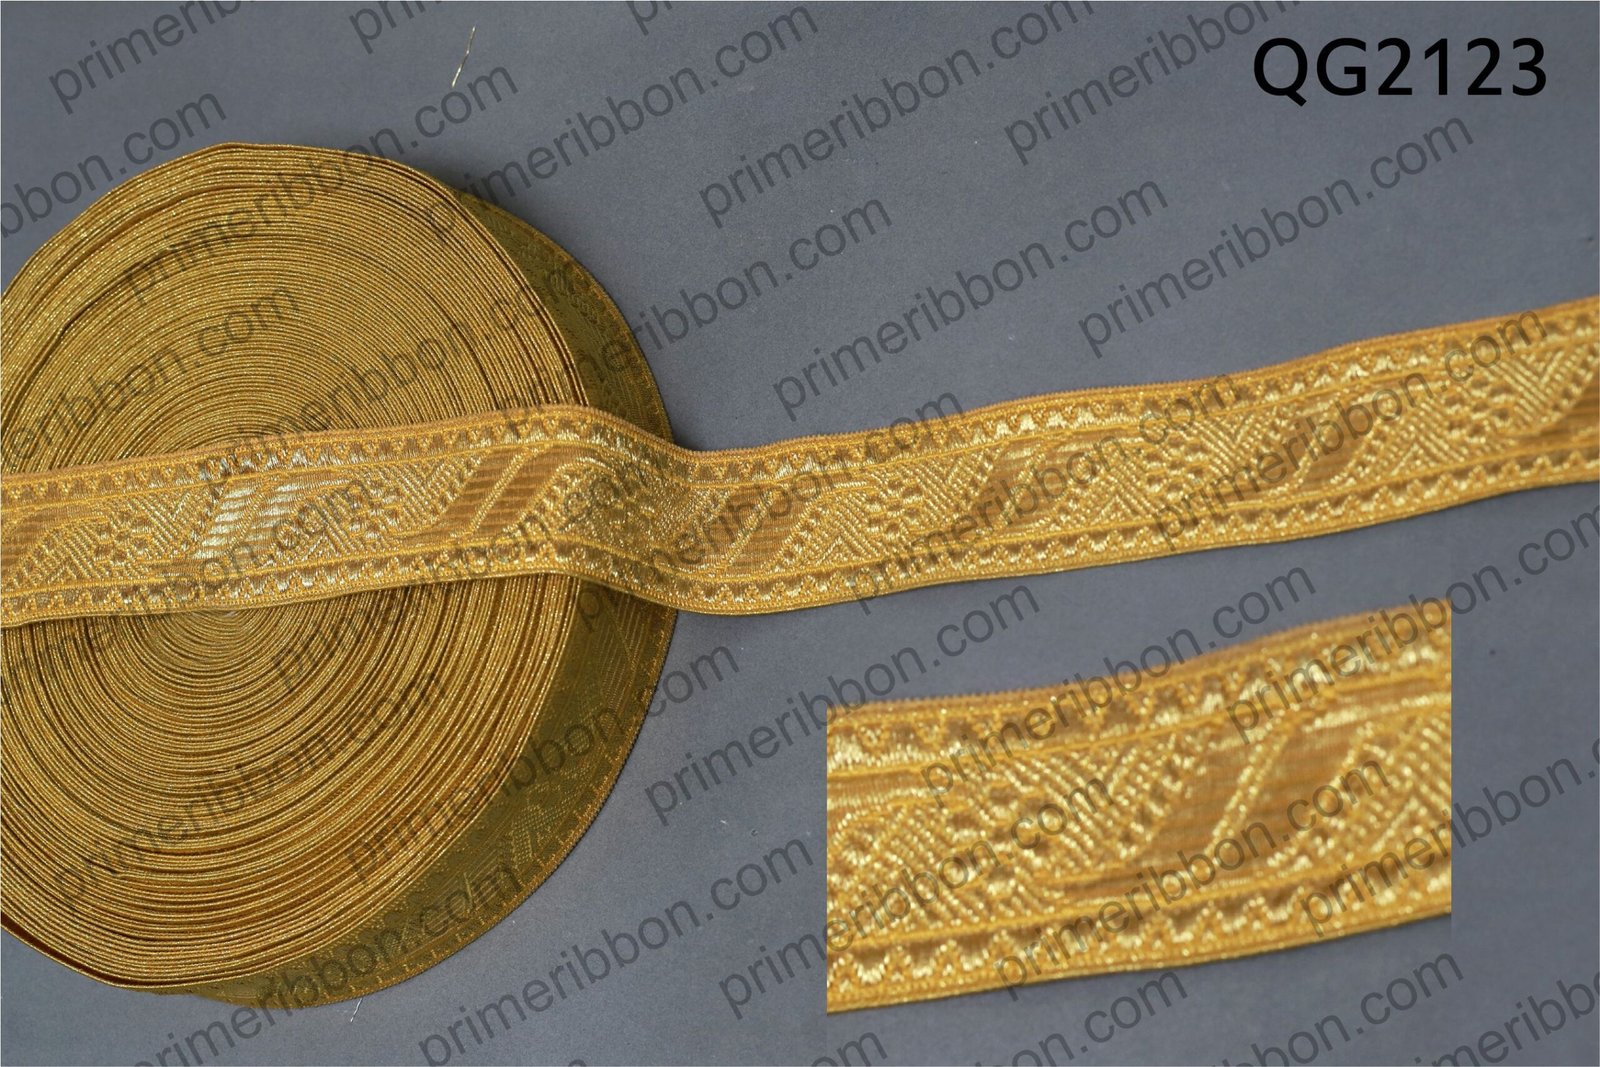 Gold 100% Wire Trim offers a sleek and durable accent for Army uniforms, adding a touch of sophistication and distinction to attire.